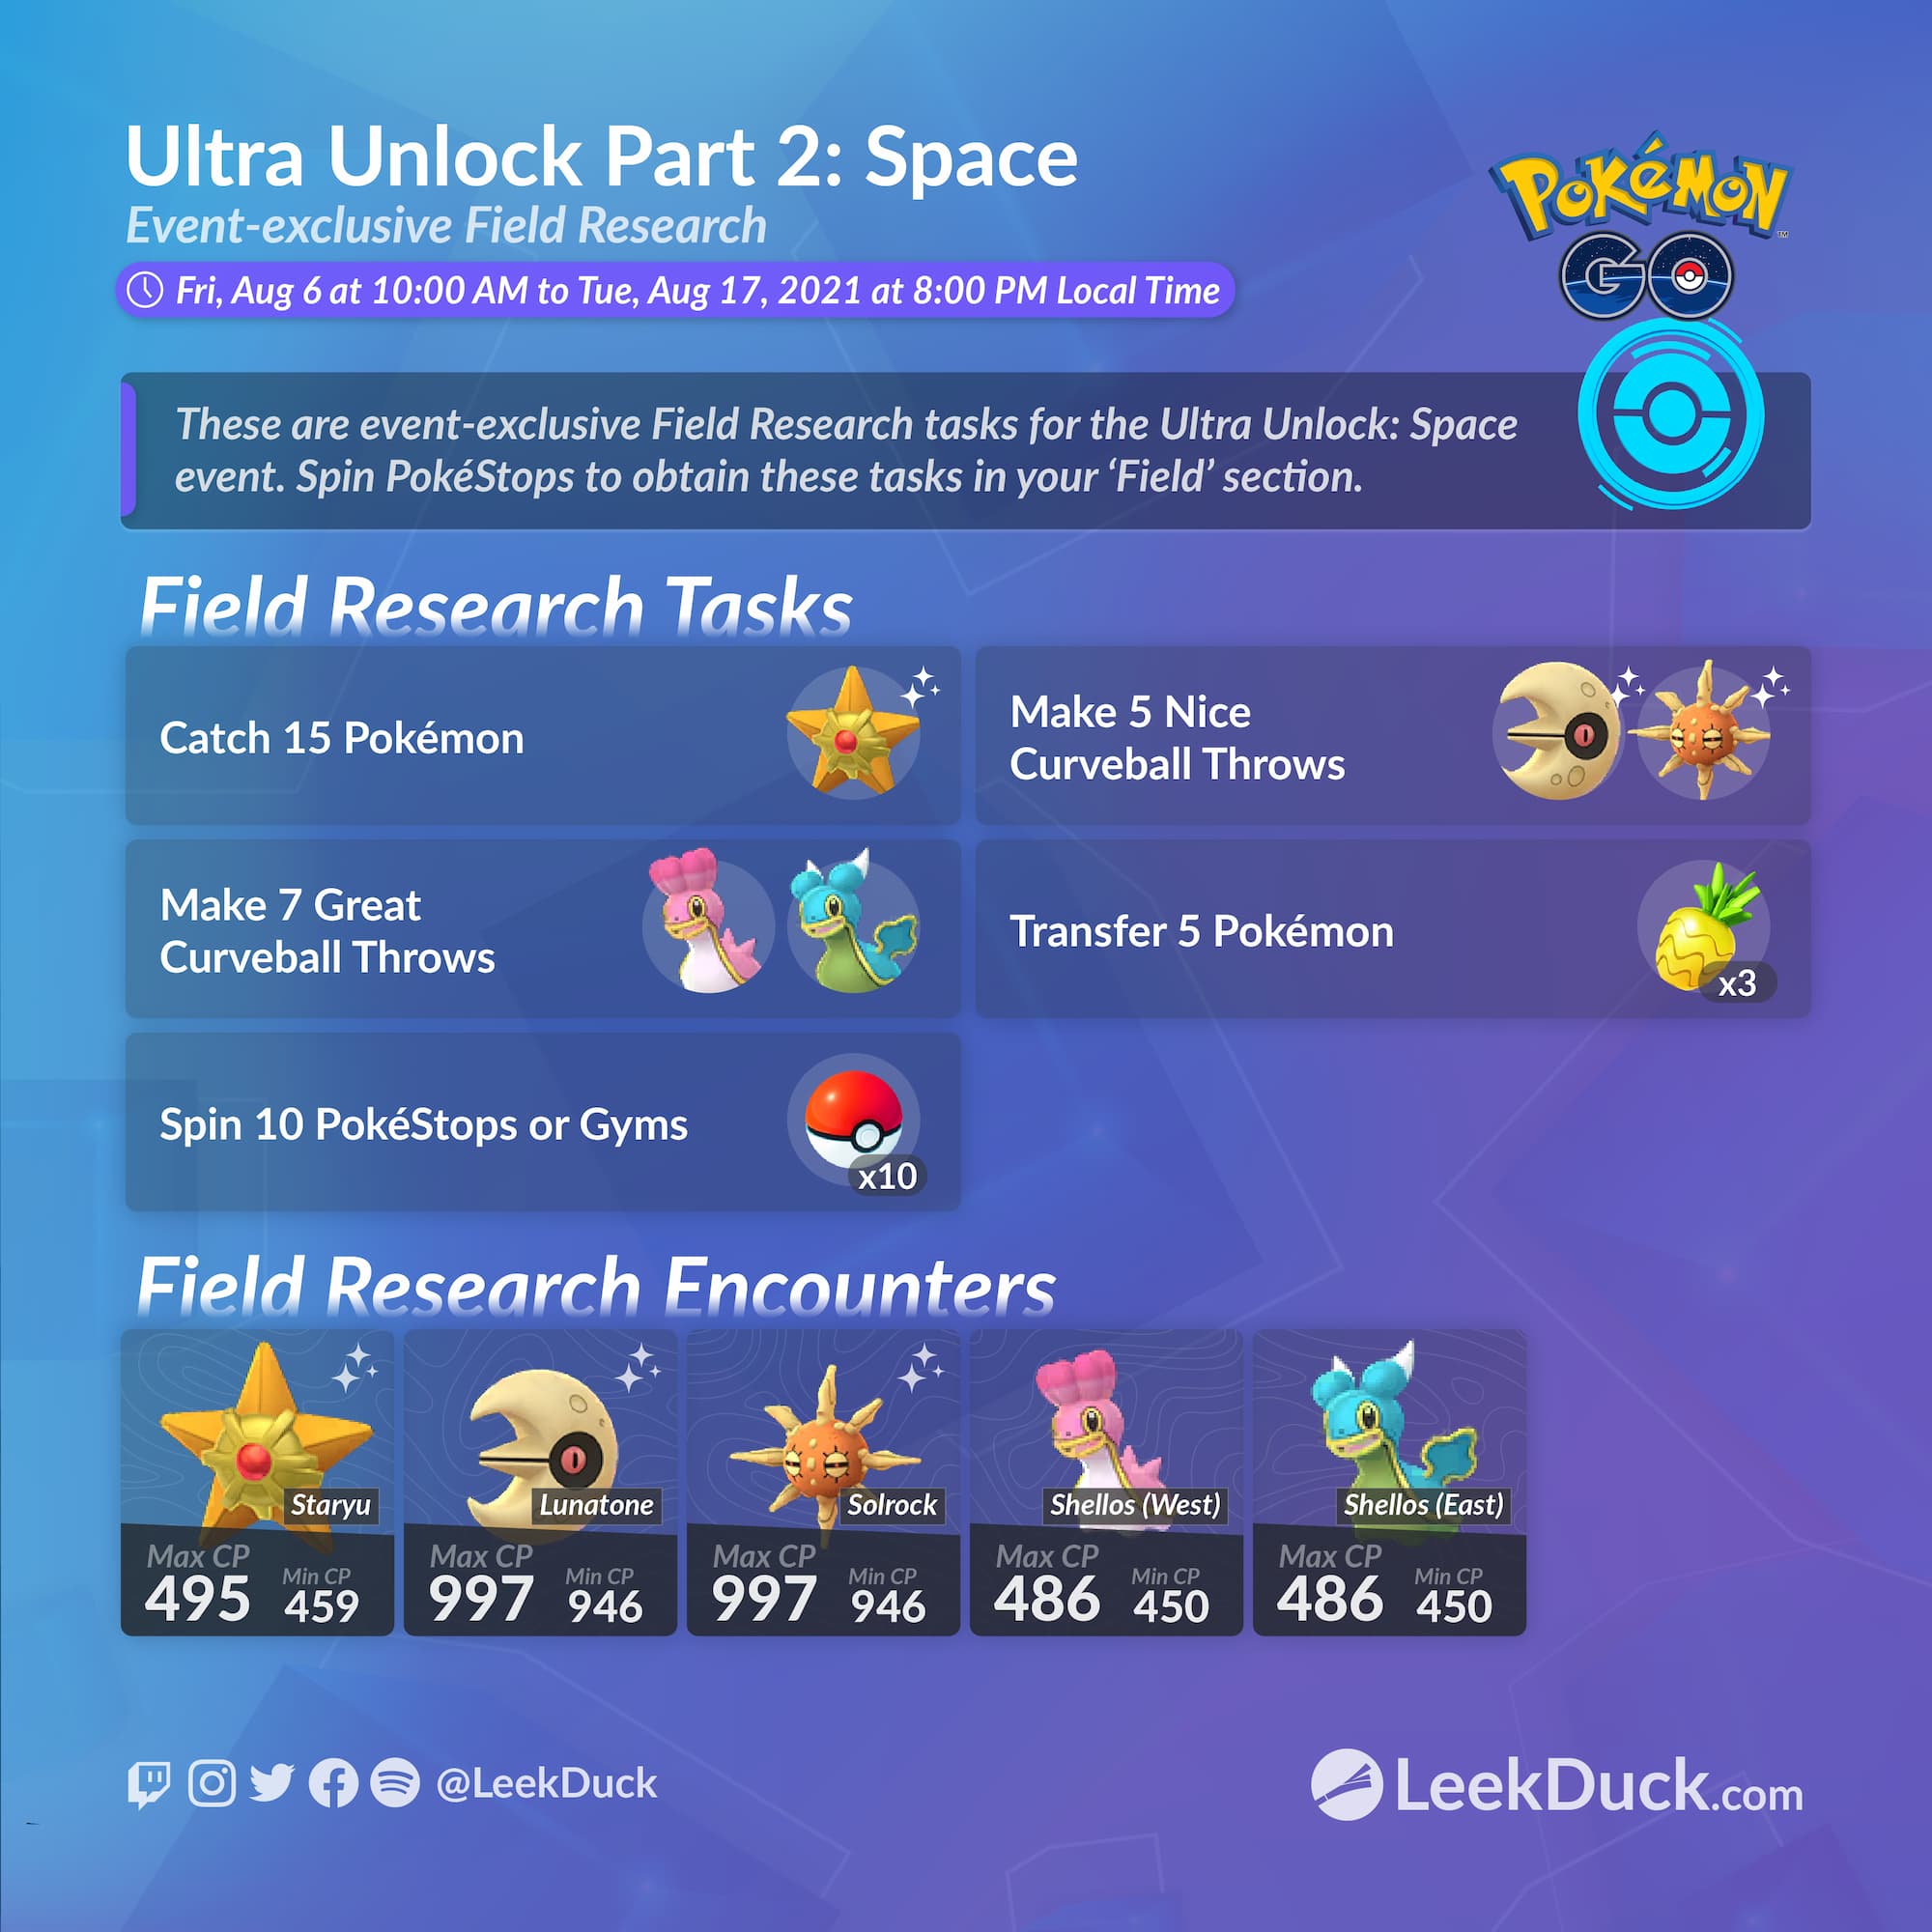 Here's What We Know About Ultra Unlock: Unown Raids In Pokémon GO